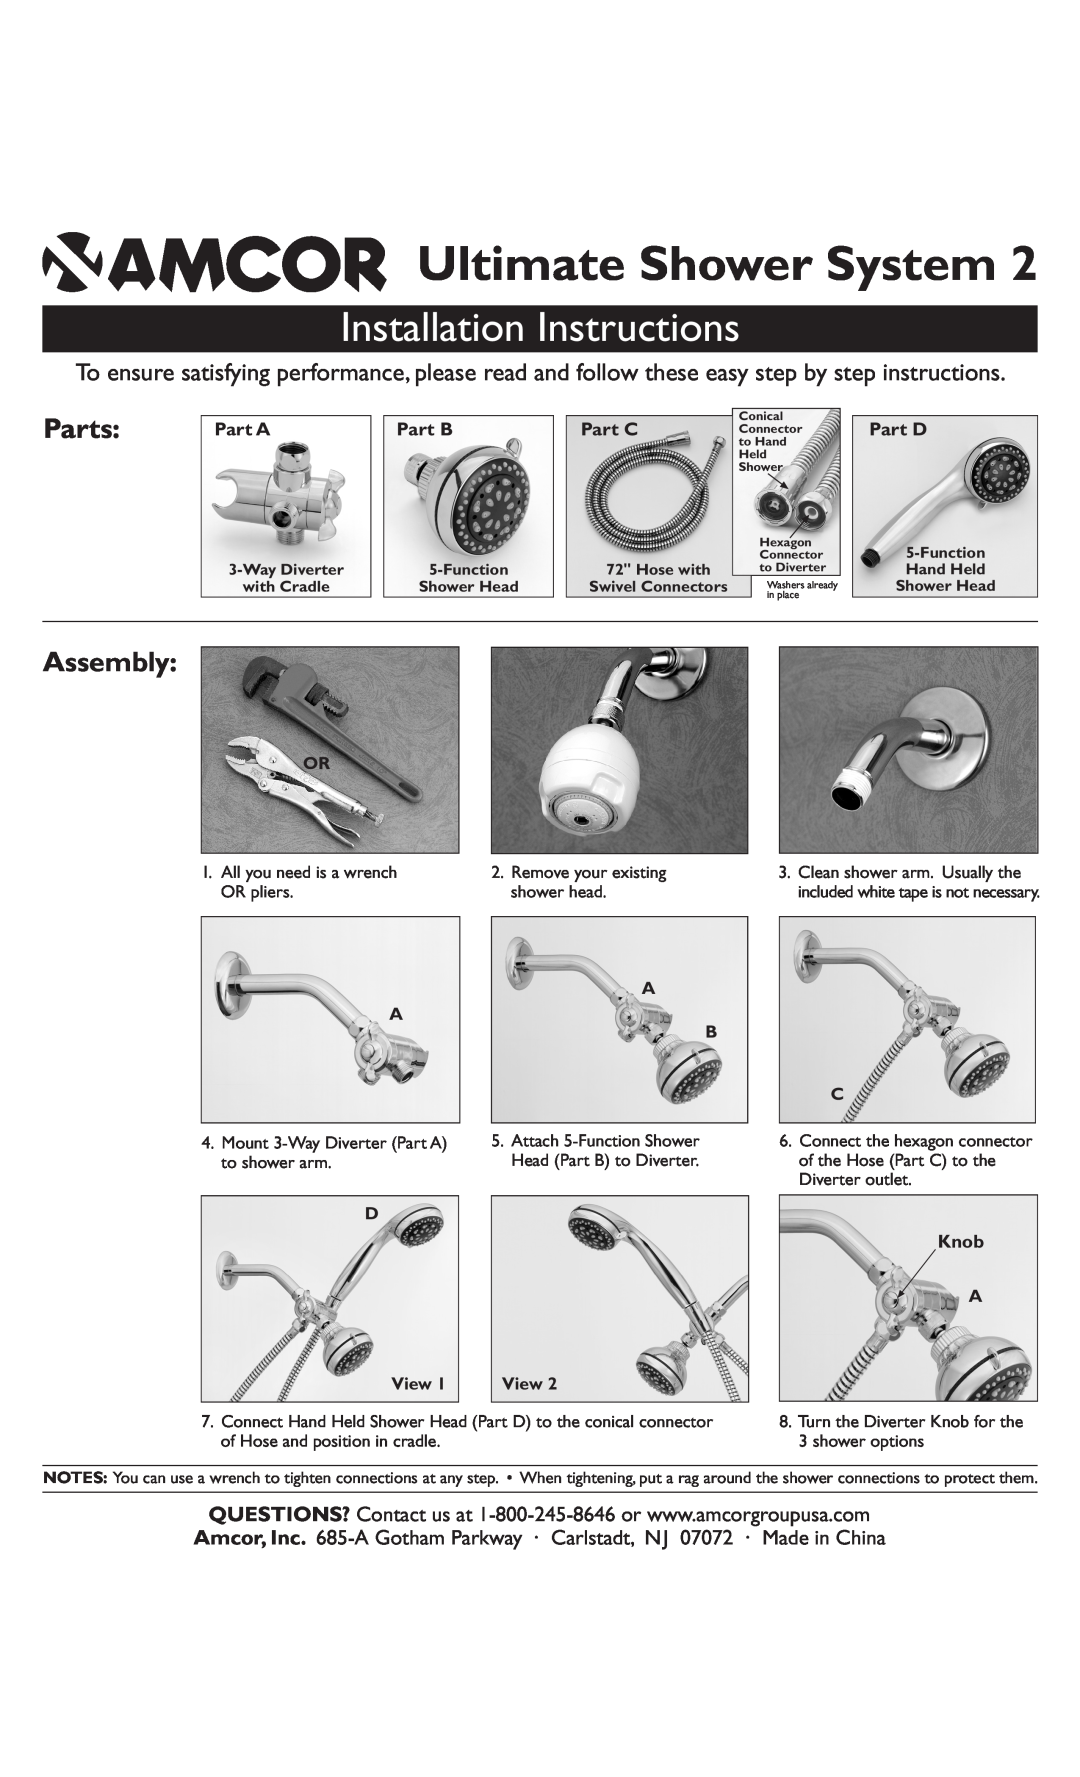 Amcor Ultimate Shower System manual Installation Instructions, Parts, Assembly 